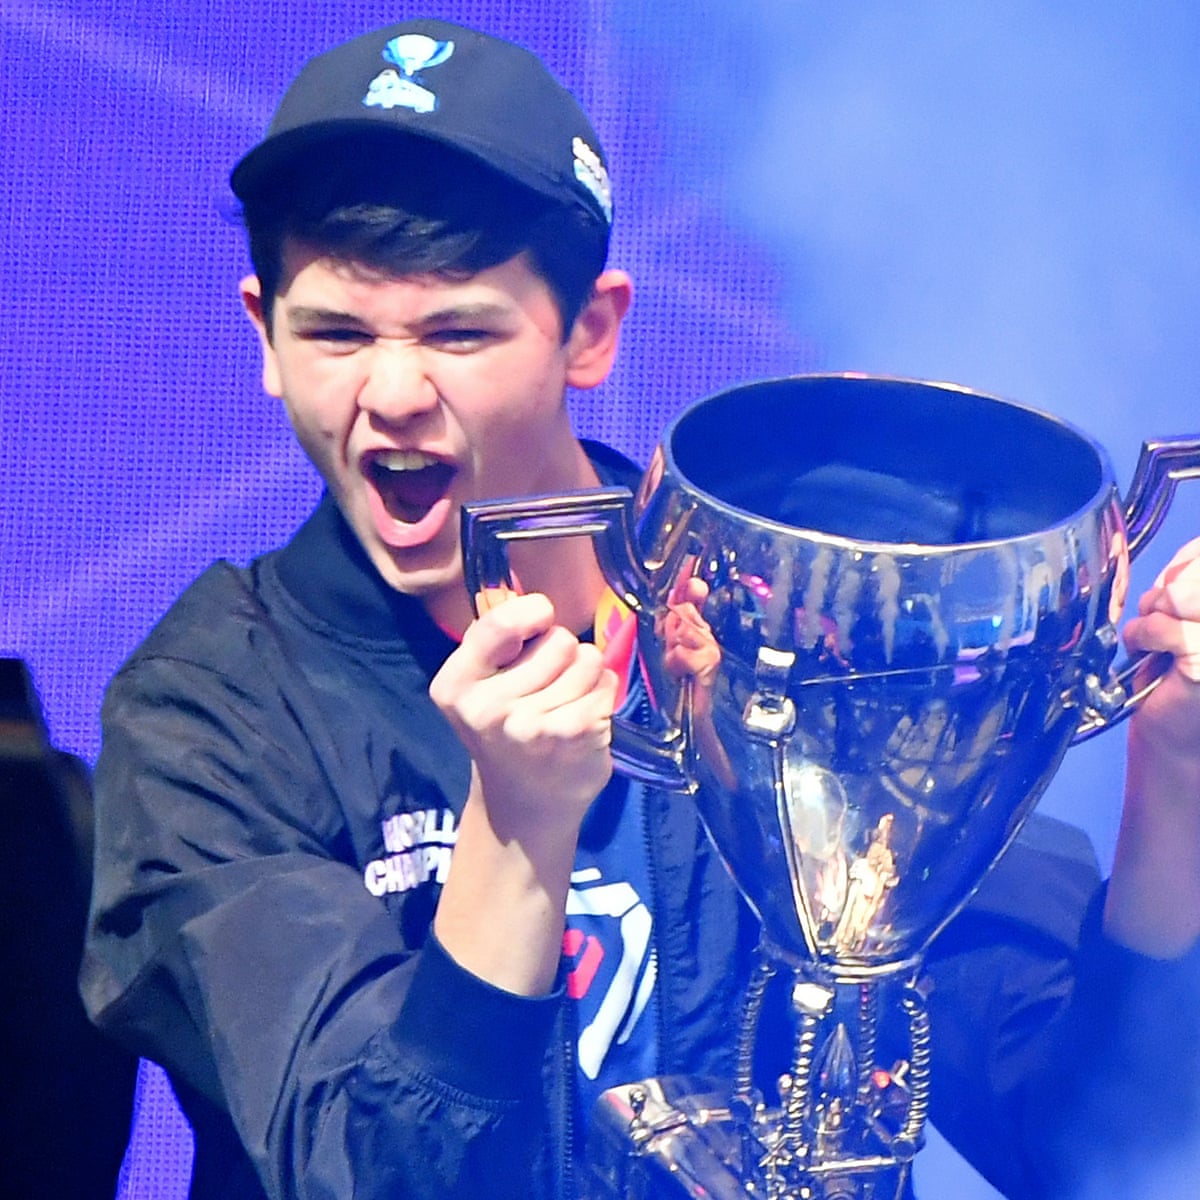 US teenager becomes first Fortnite World Cup champion, winning $3m | Fortnite | The Guardian